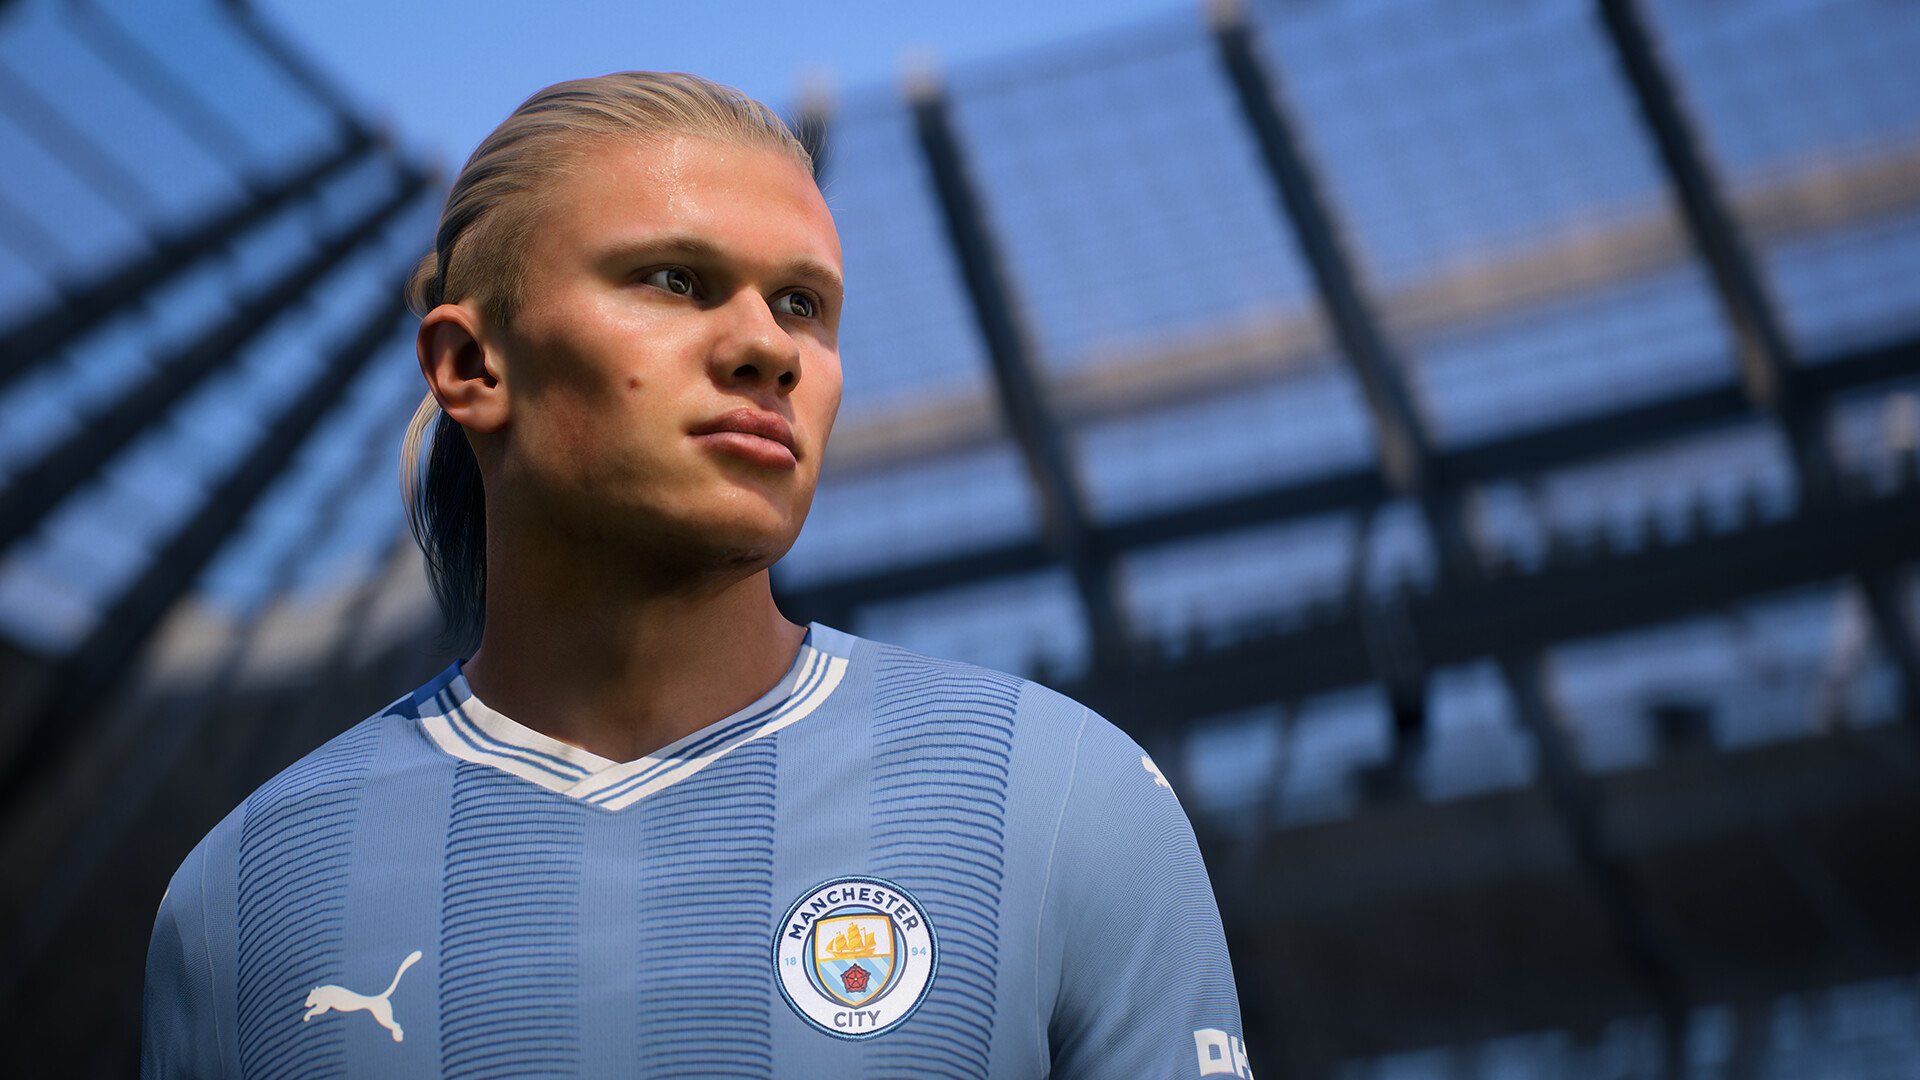 FIFA 23: What new features will be on PlayStation and Xbox?